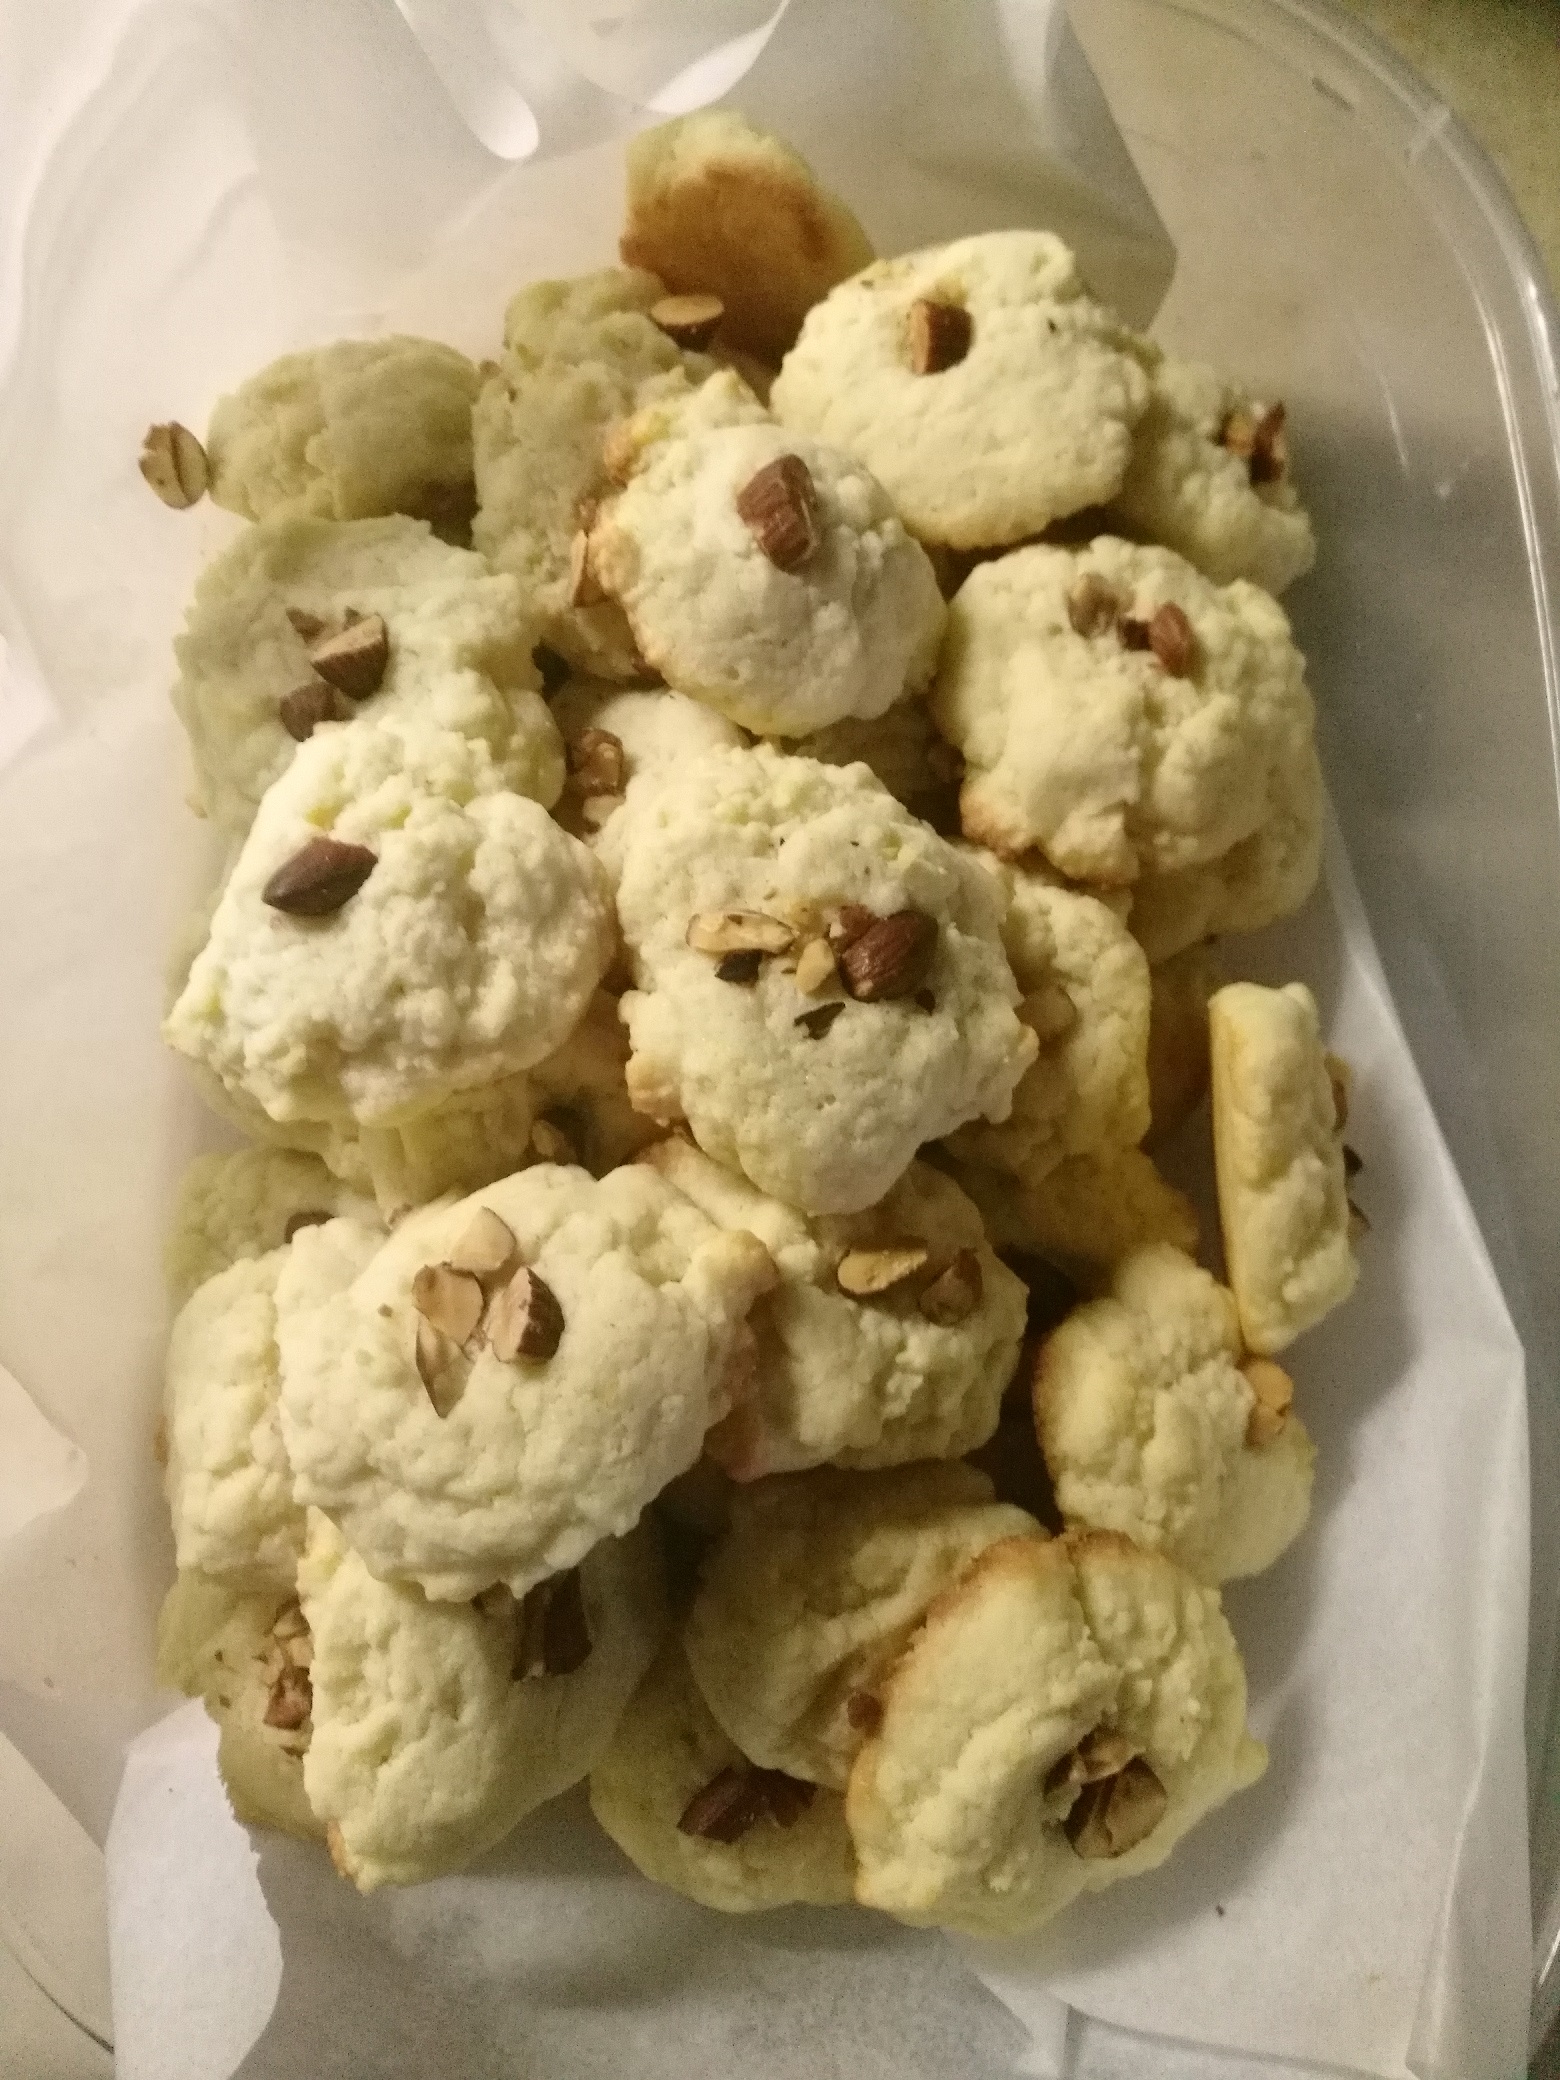 Mouthwatering Almond Cookie Recipe – No Limits on Deliciousness!